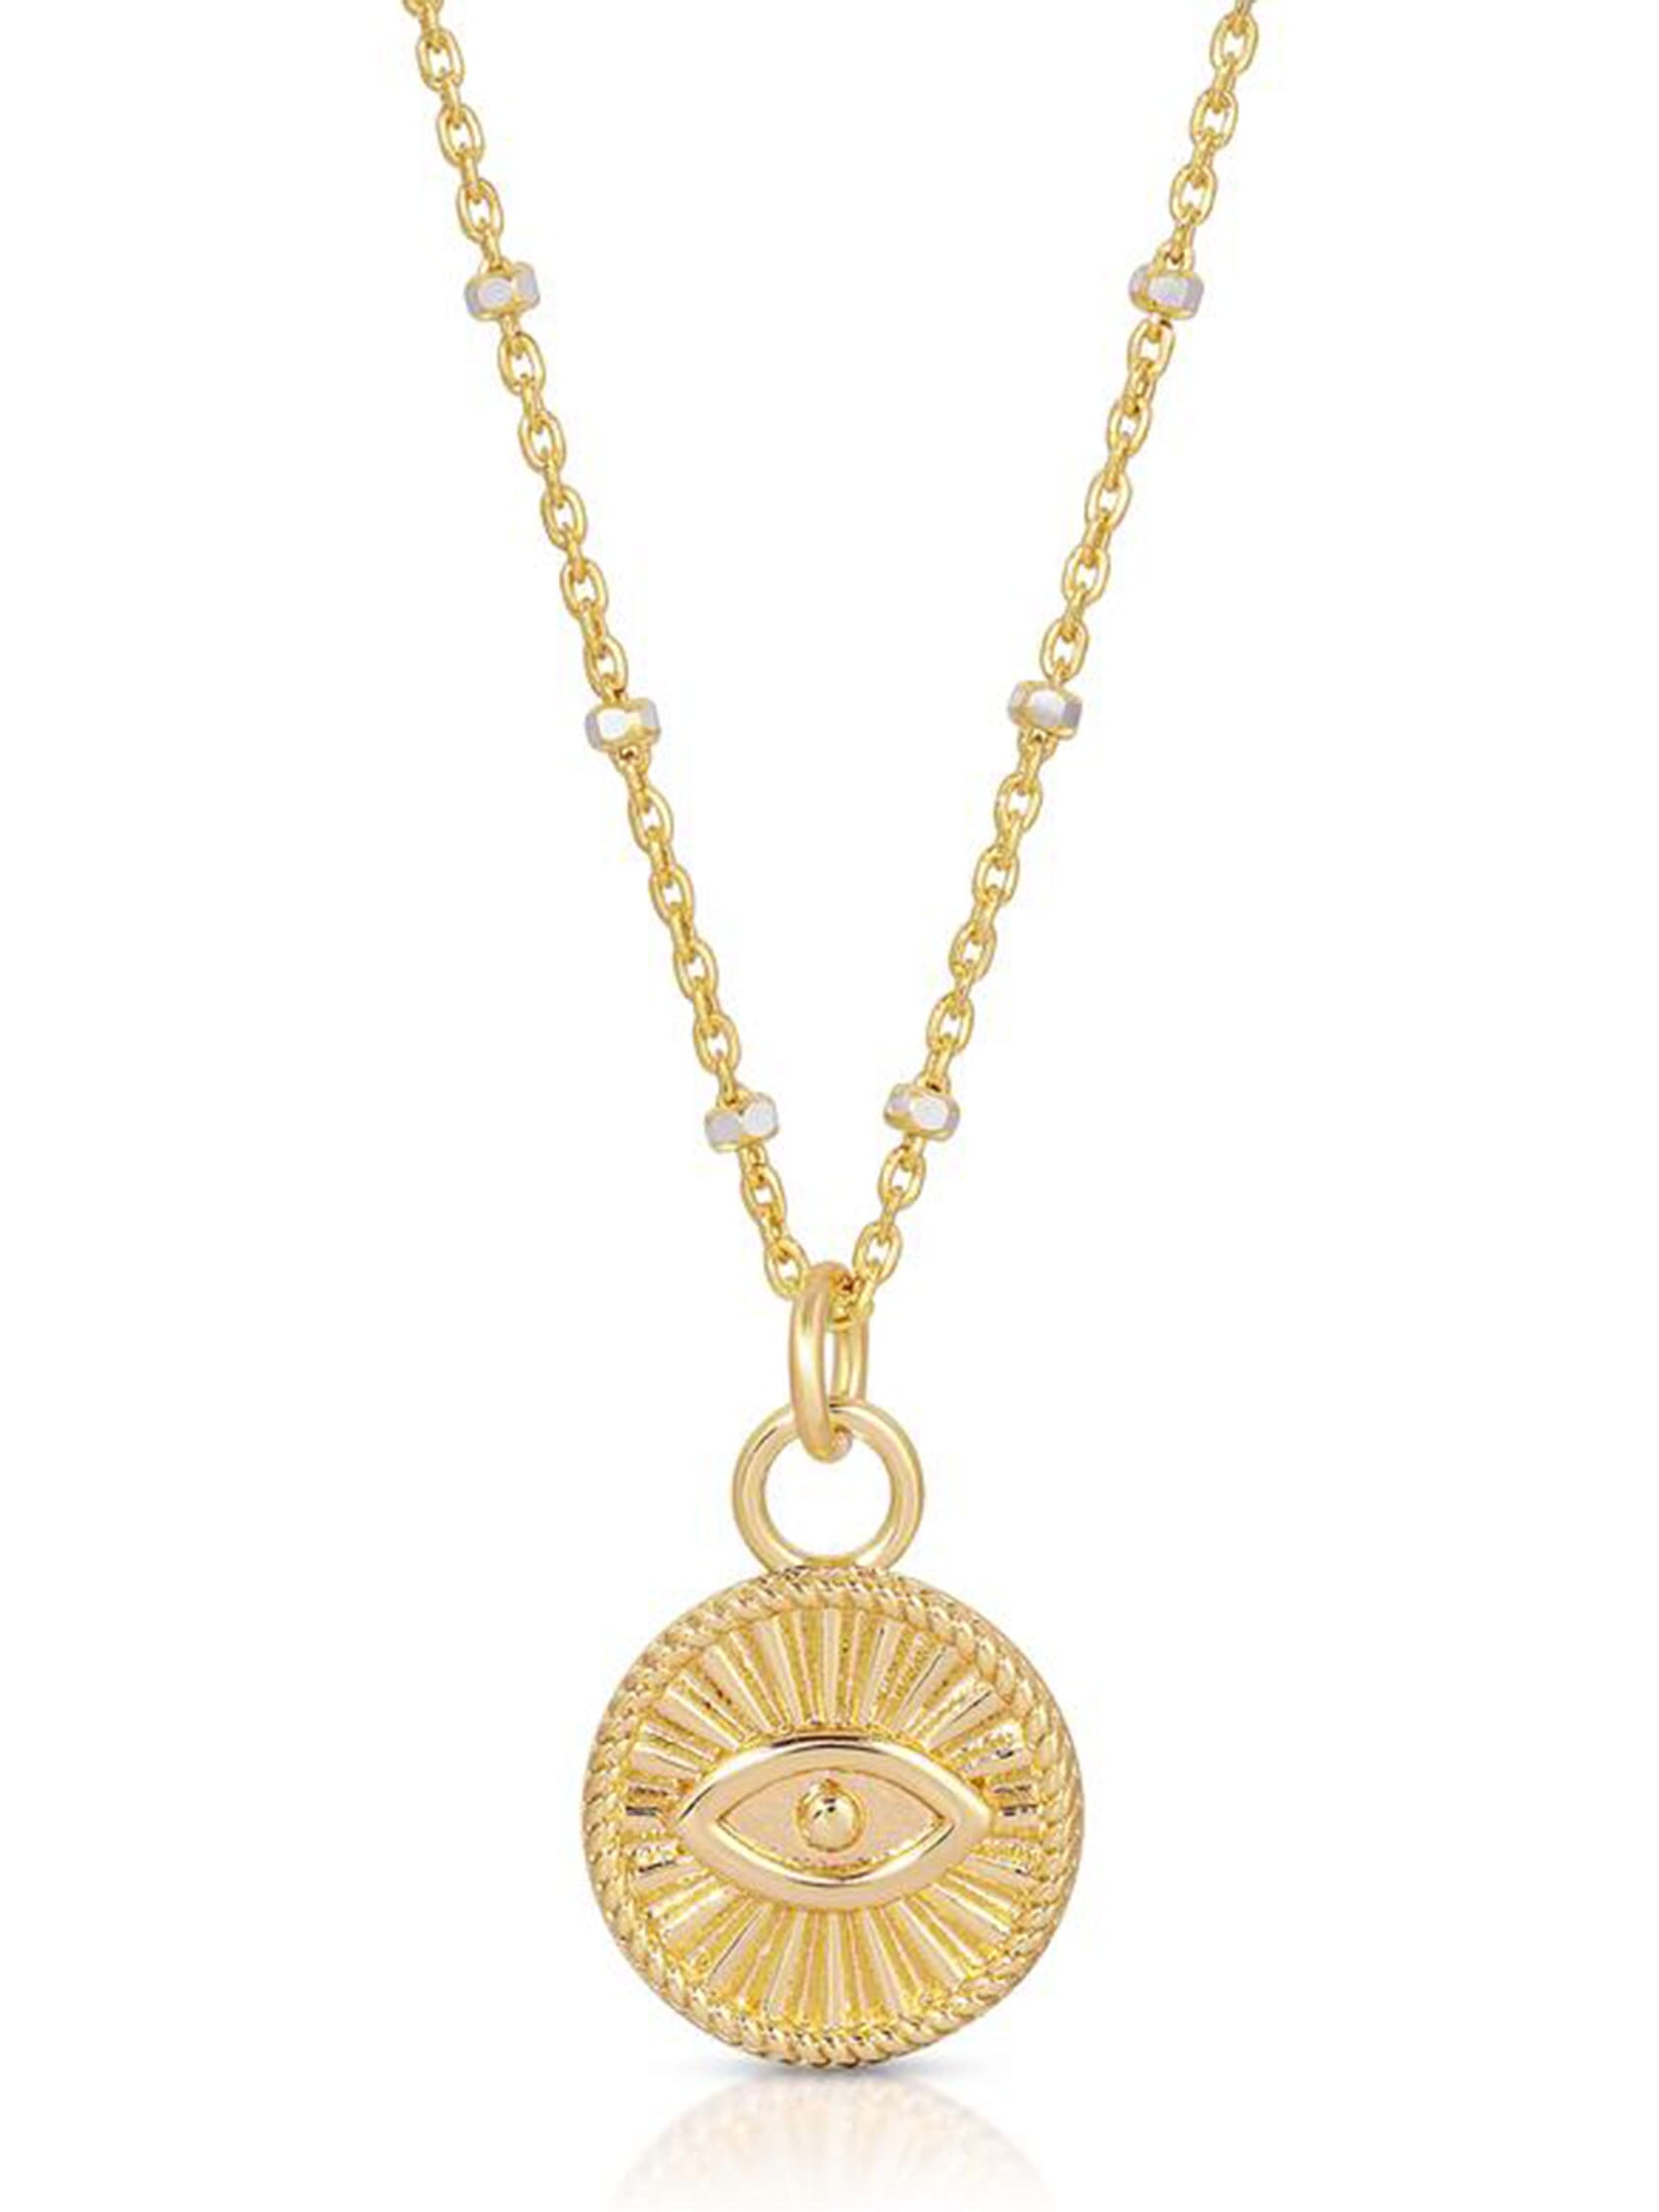 Joy Dravecky | Cleo Coin Necklace in Gold| FashionPass